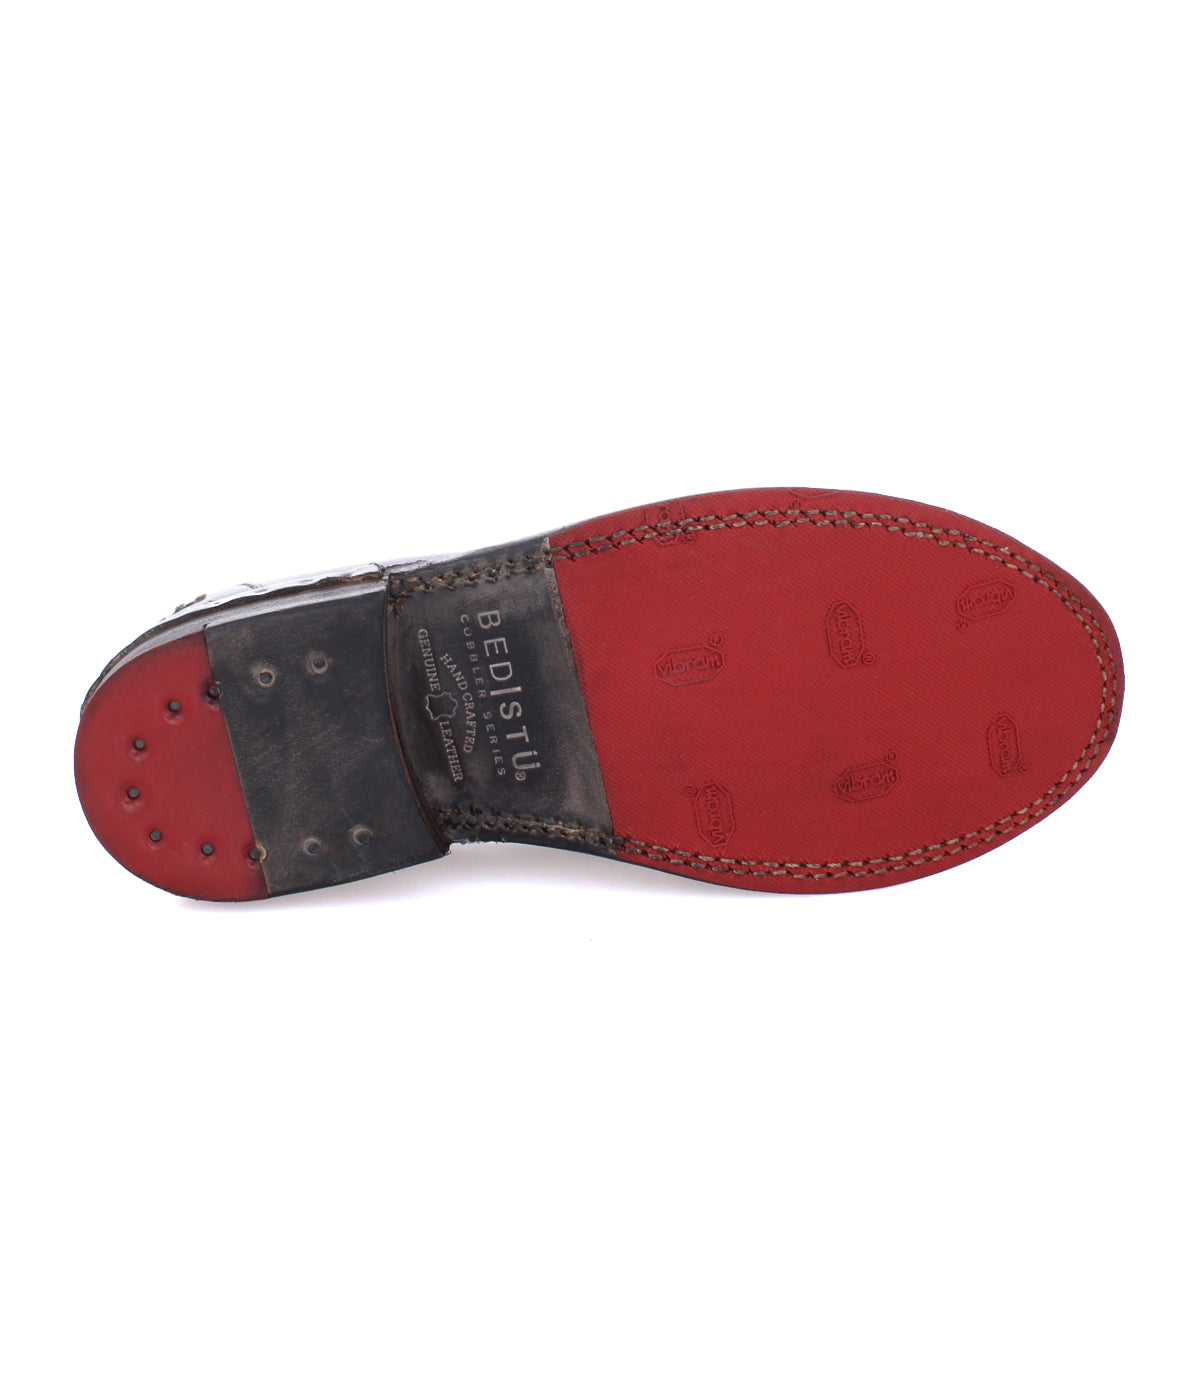 A pair of Bed Stu Reina women's shoes with a red sole.